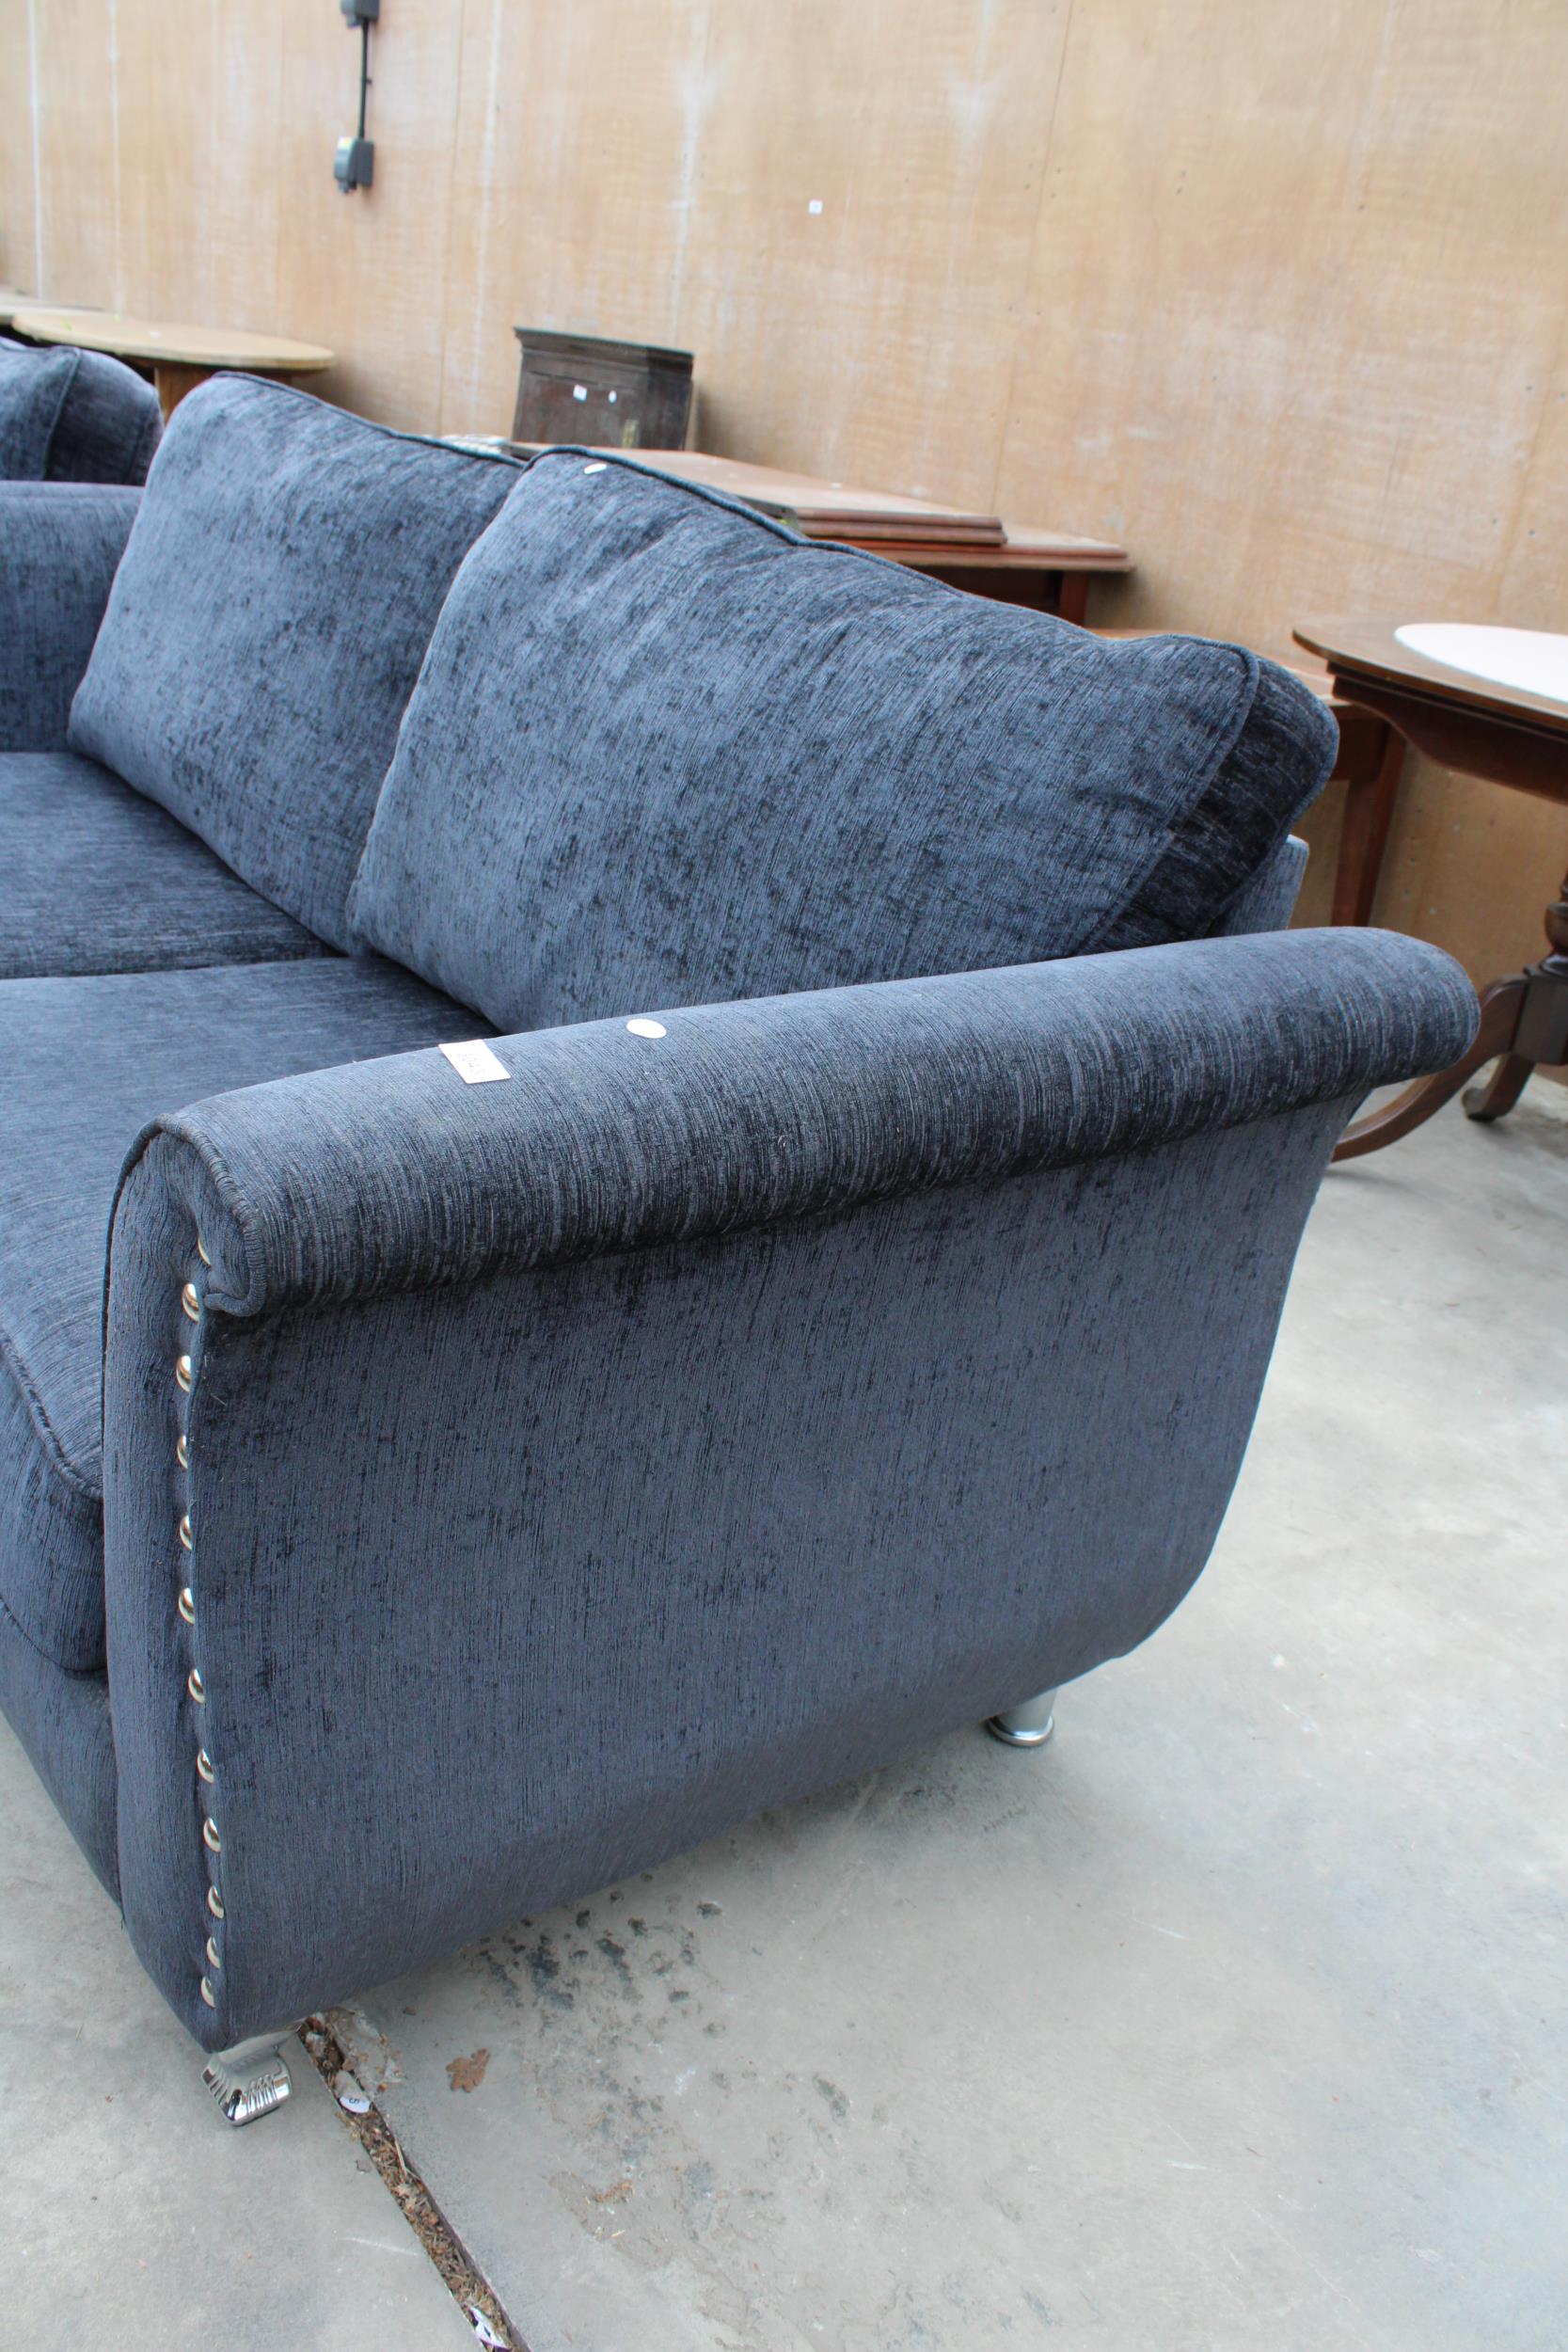 A MODERN SLATE GREY THREE SEATER SETTEE WITH POLISHED CHROME BUTTONED ARMS AND LEGS - Image 4 of 4